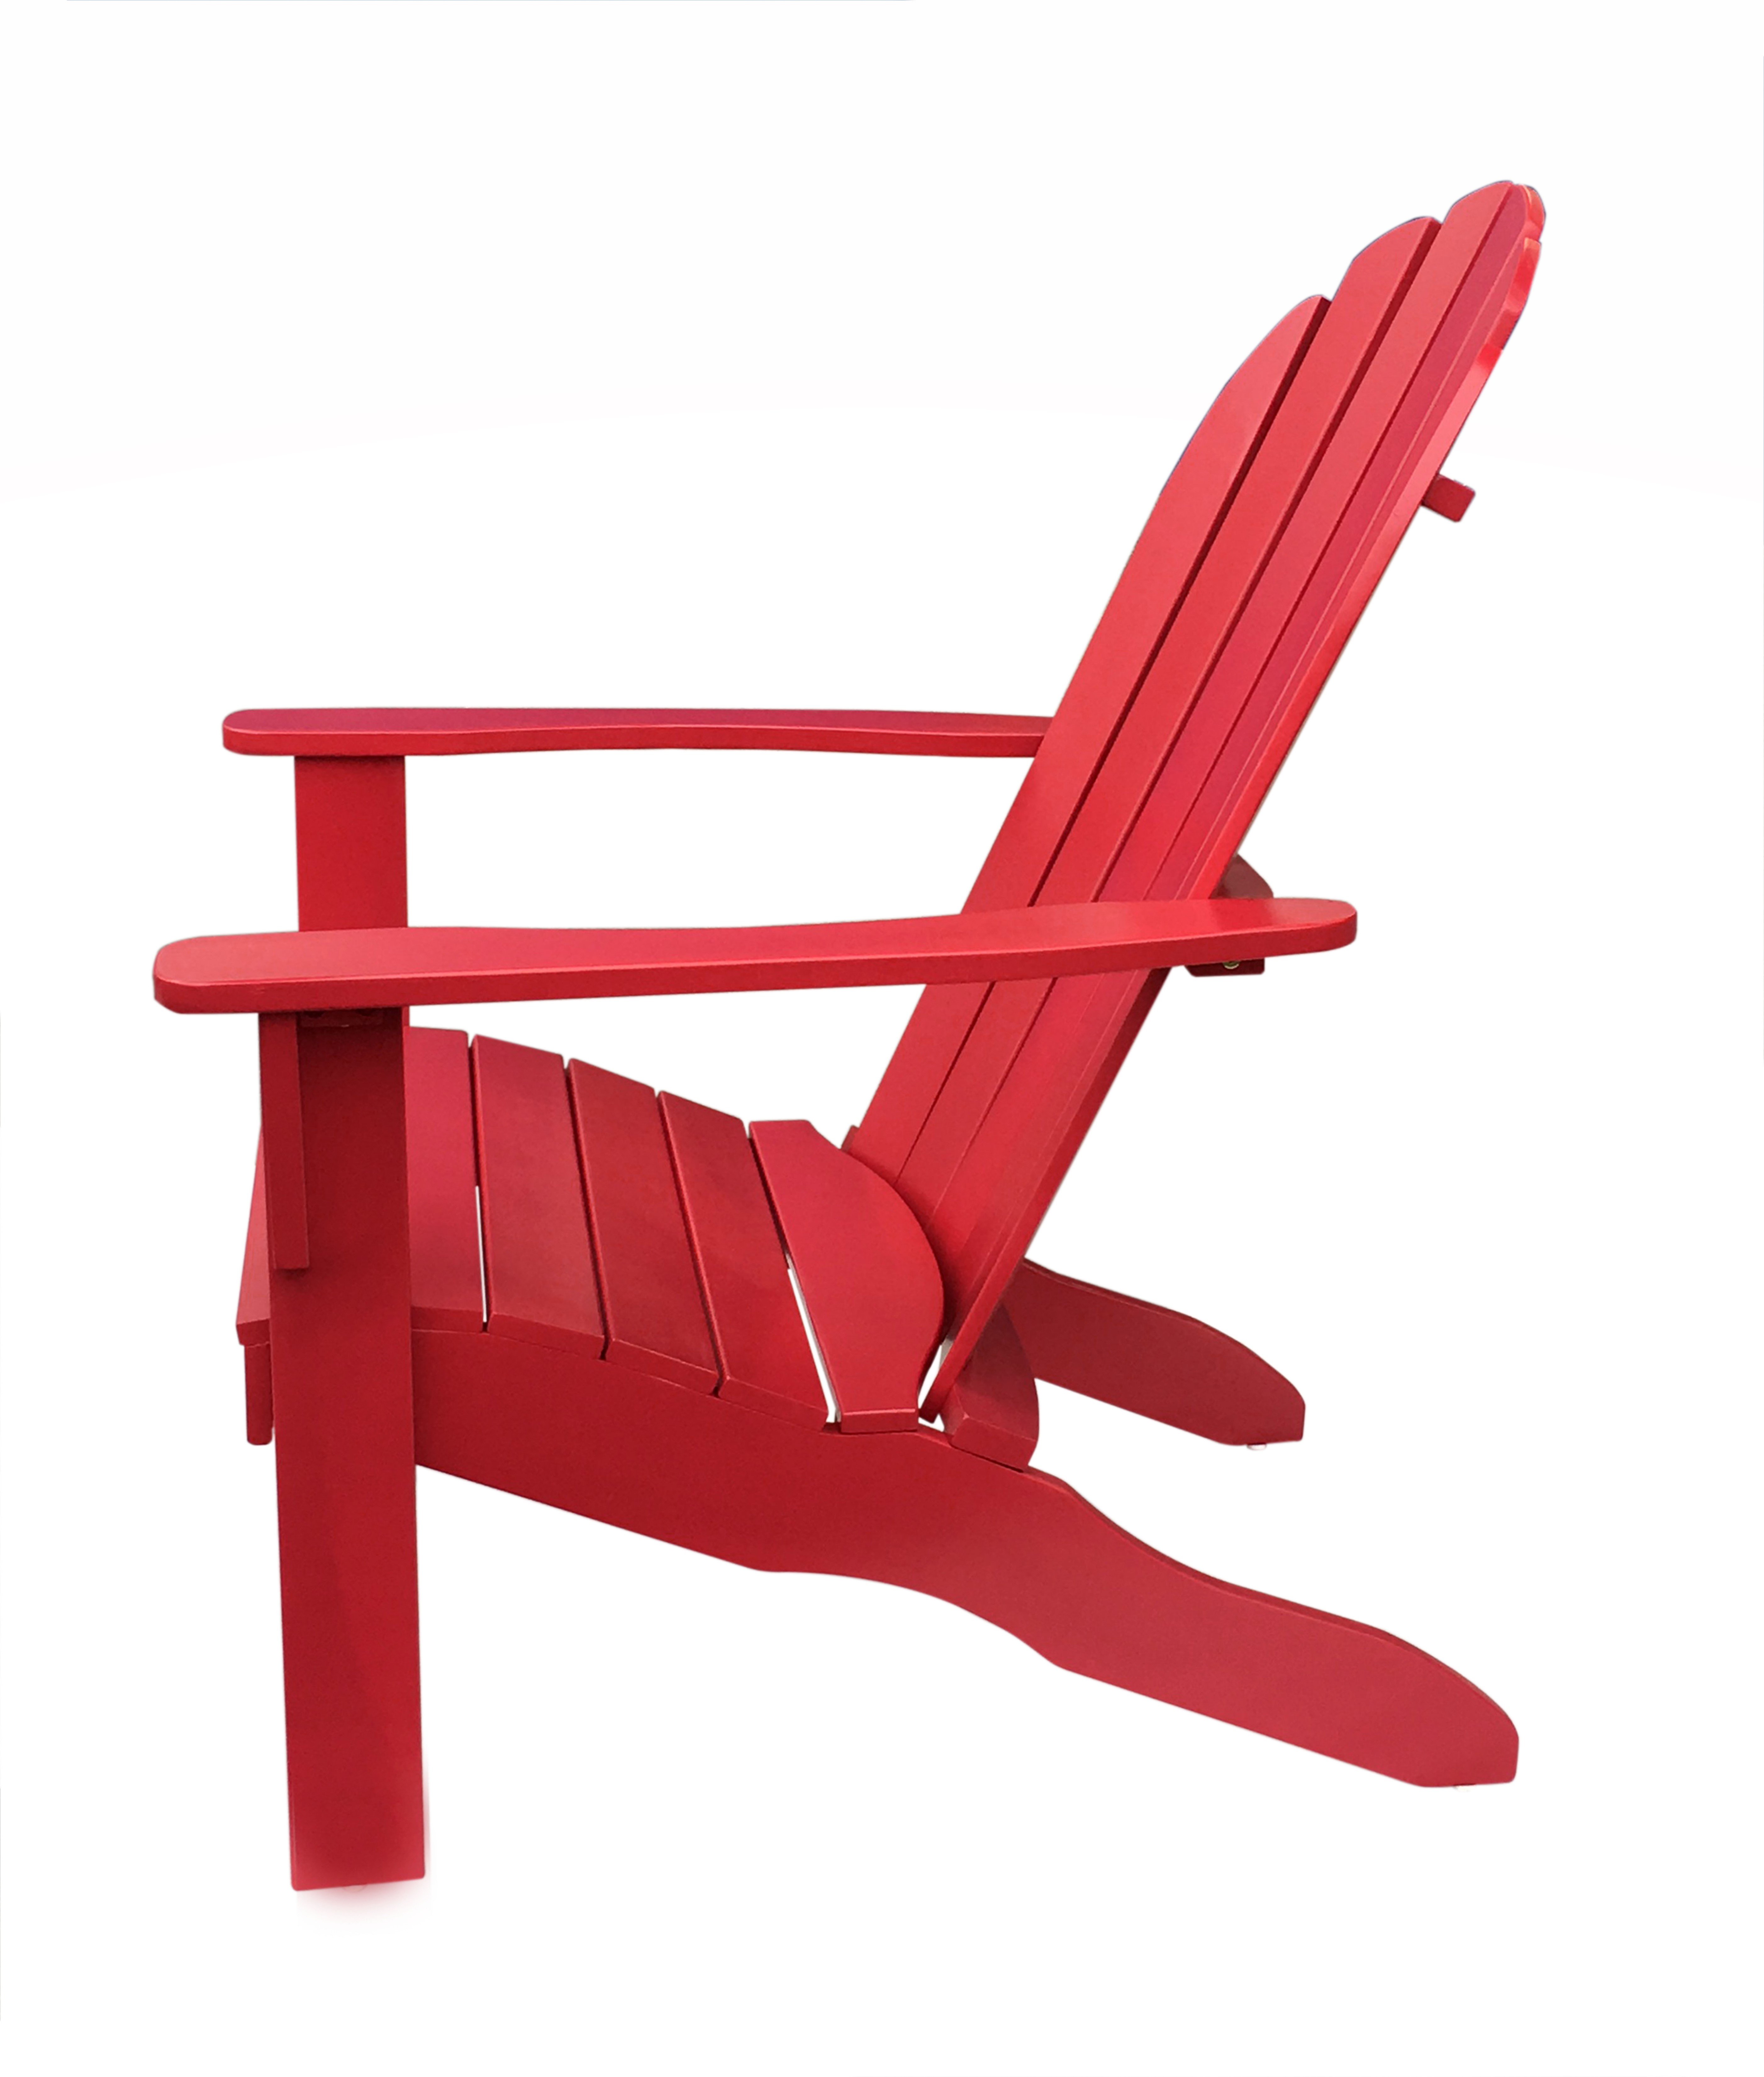 Mainstays Wood Outdoor Adirondack Chair, Red Color - image 4 of 8